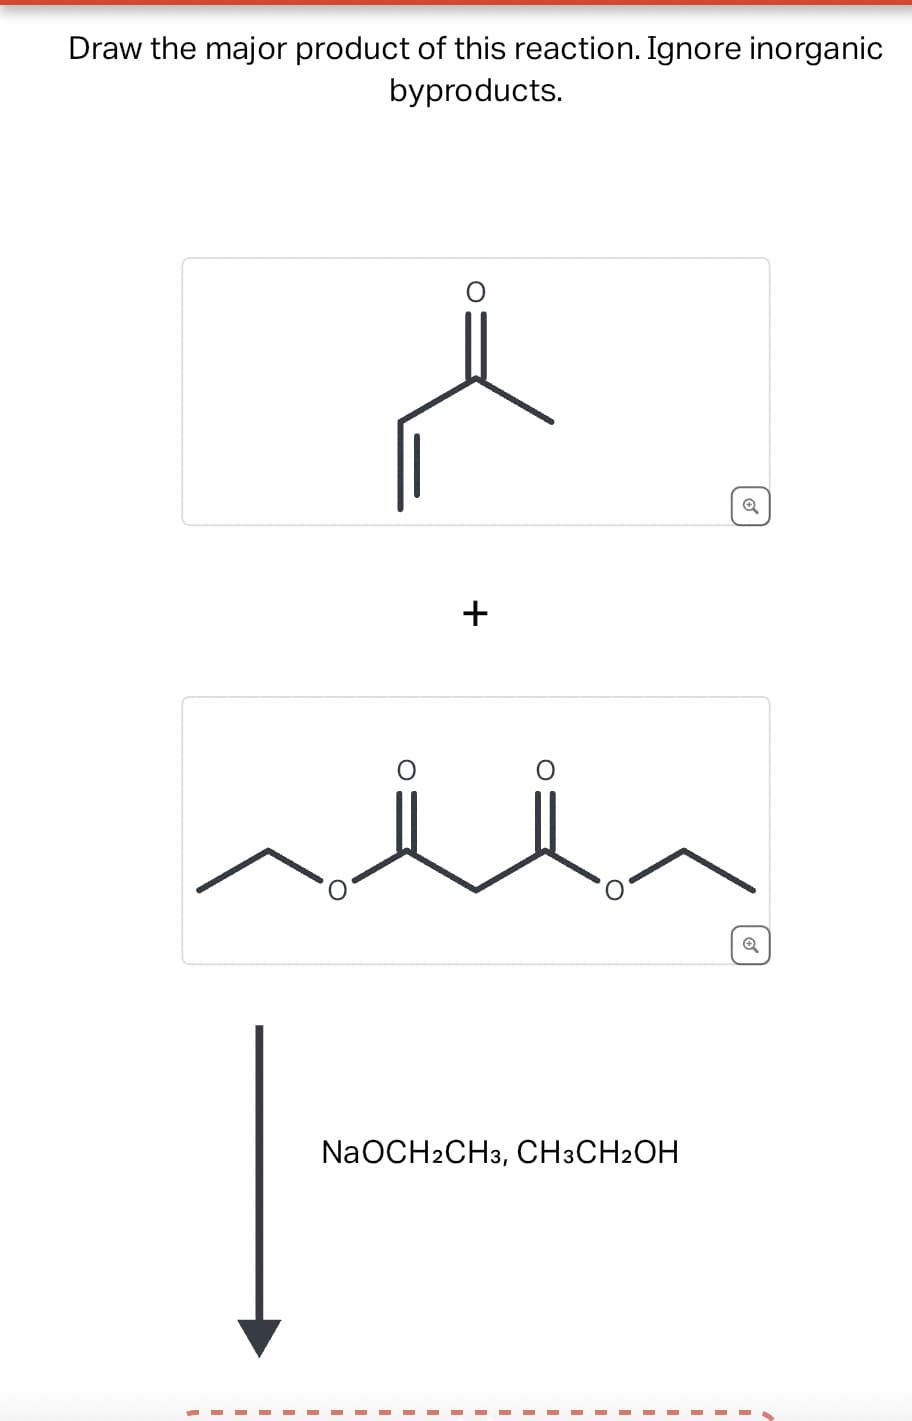 Draw the major product of this reaction. Ignore inorganic
byproducts.
+
O
NaOCH2CH3, CH3CH2OH
✔